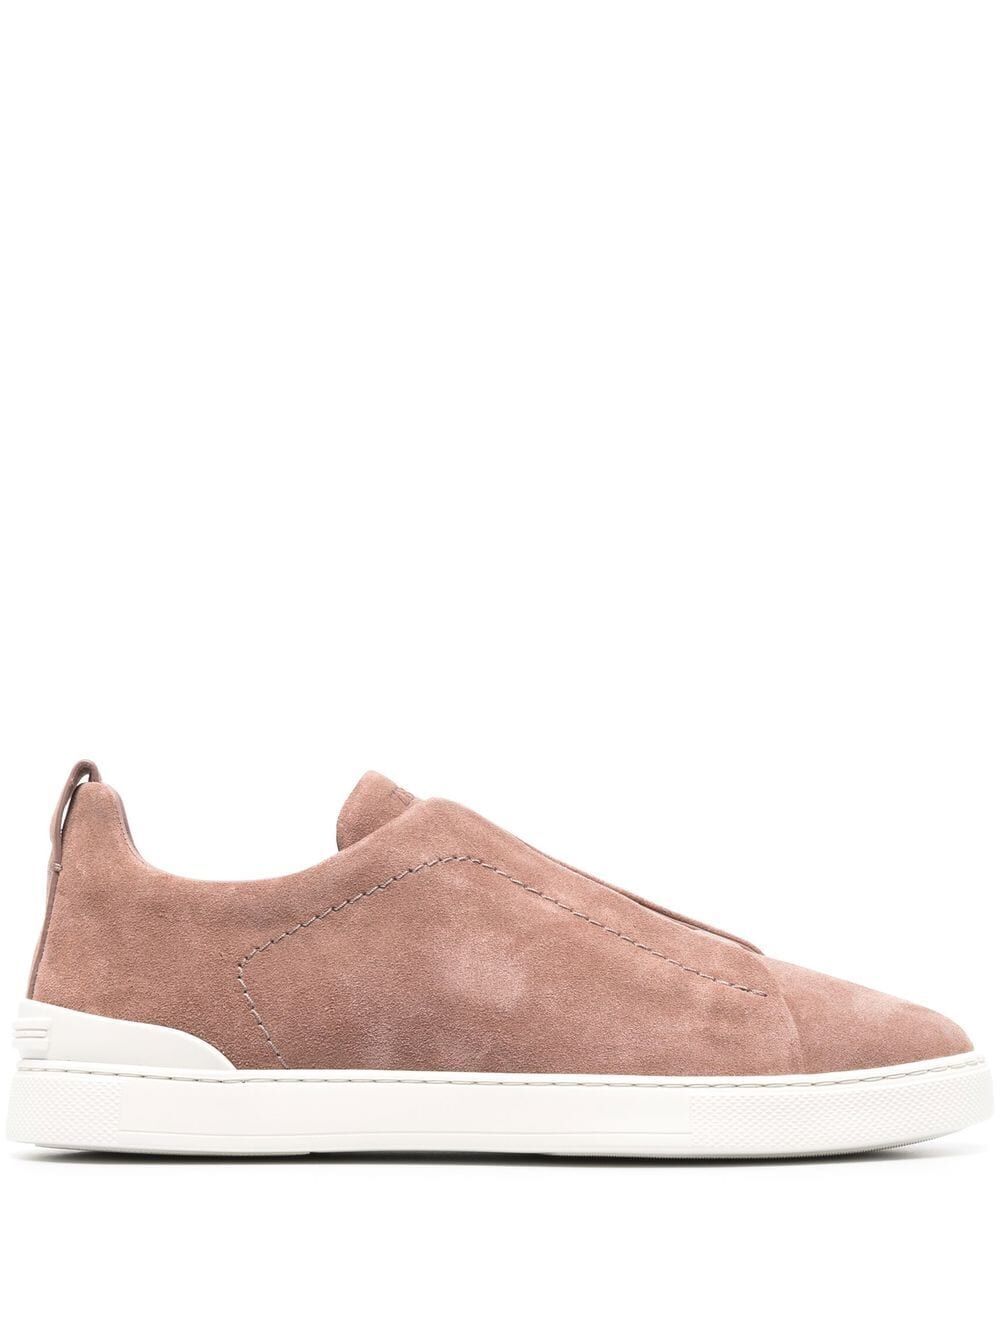 Zegna Triple Stitch Low Top Sneakers In Brown